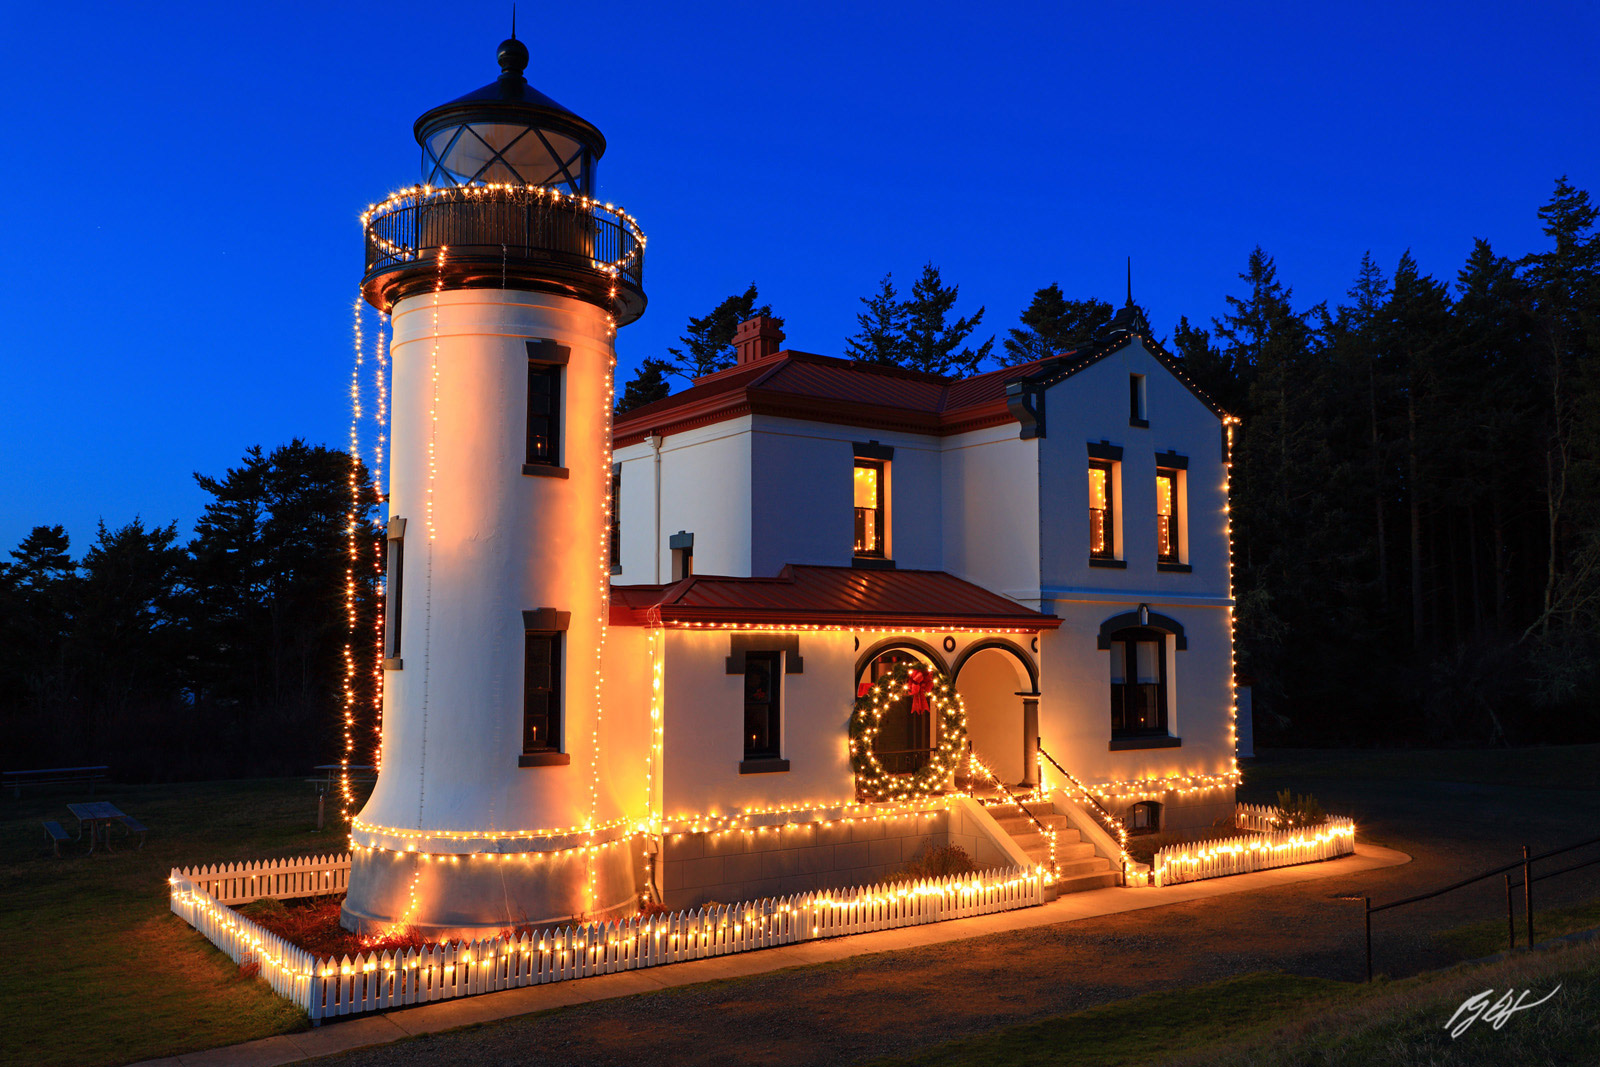 Admiralty Head Lighthouse at Night with Holiday Light in Fort Casey State Park in Washington